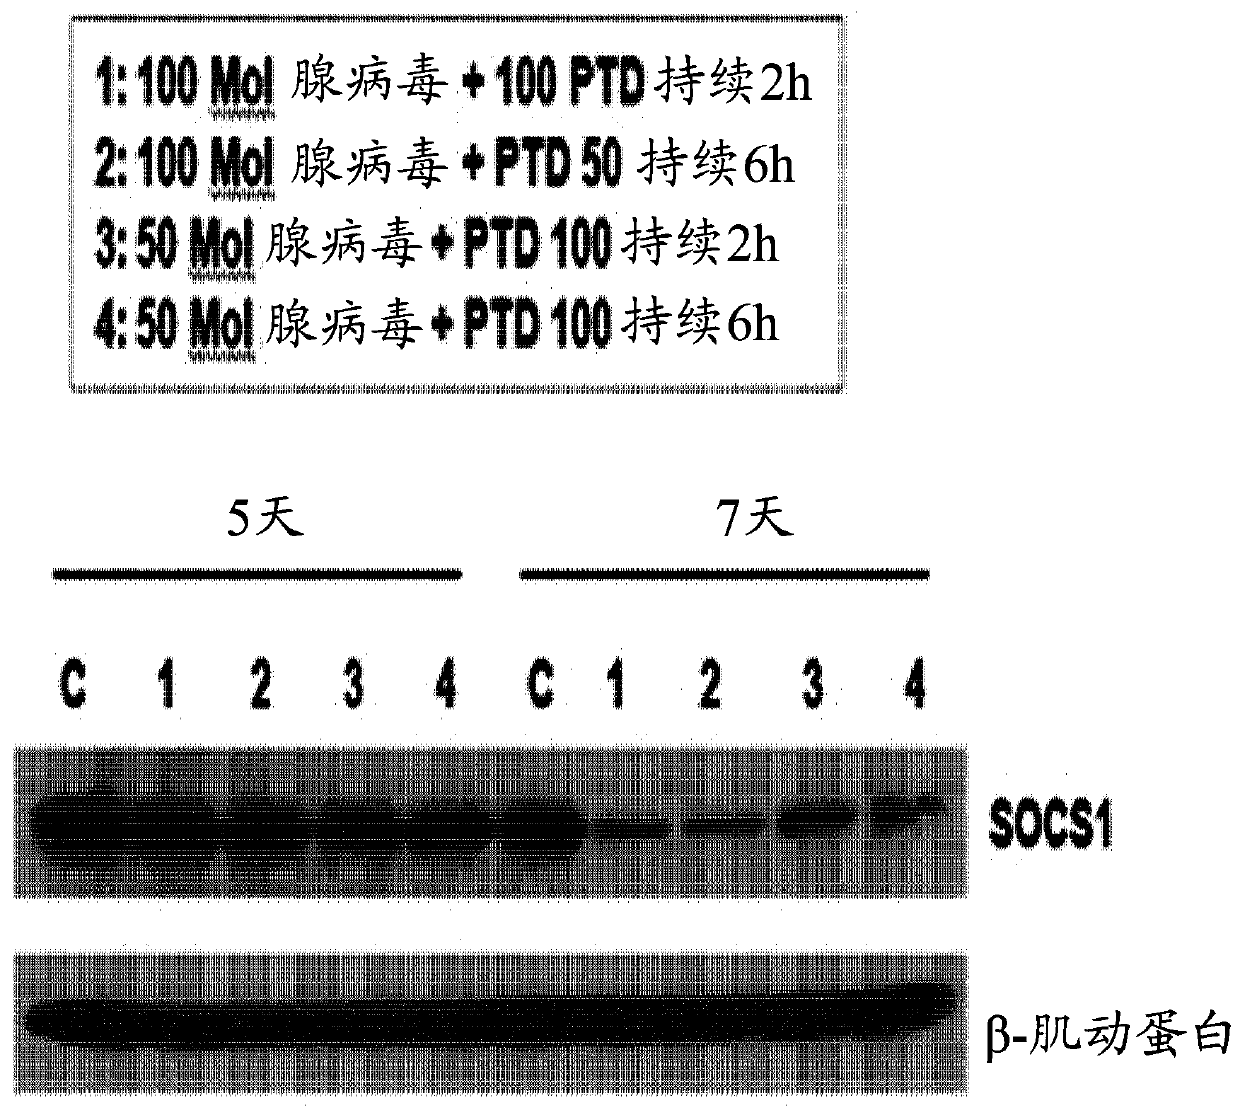 Method for selecting high-efficacy stem cell by using downregulation in expression or activity of socs